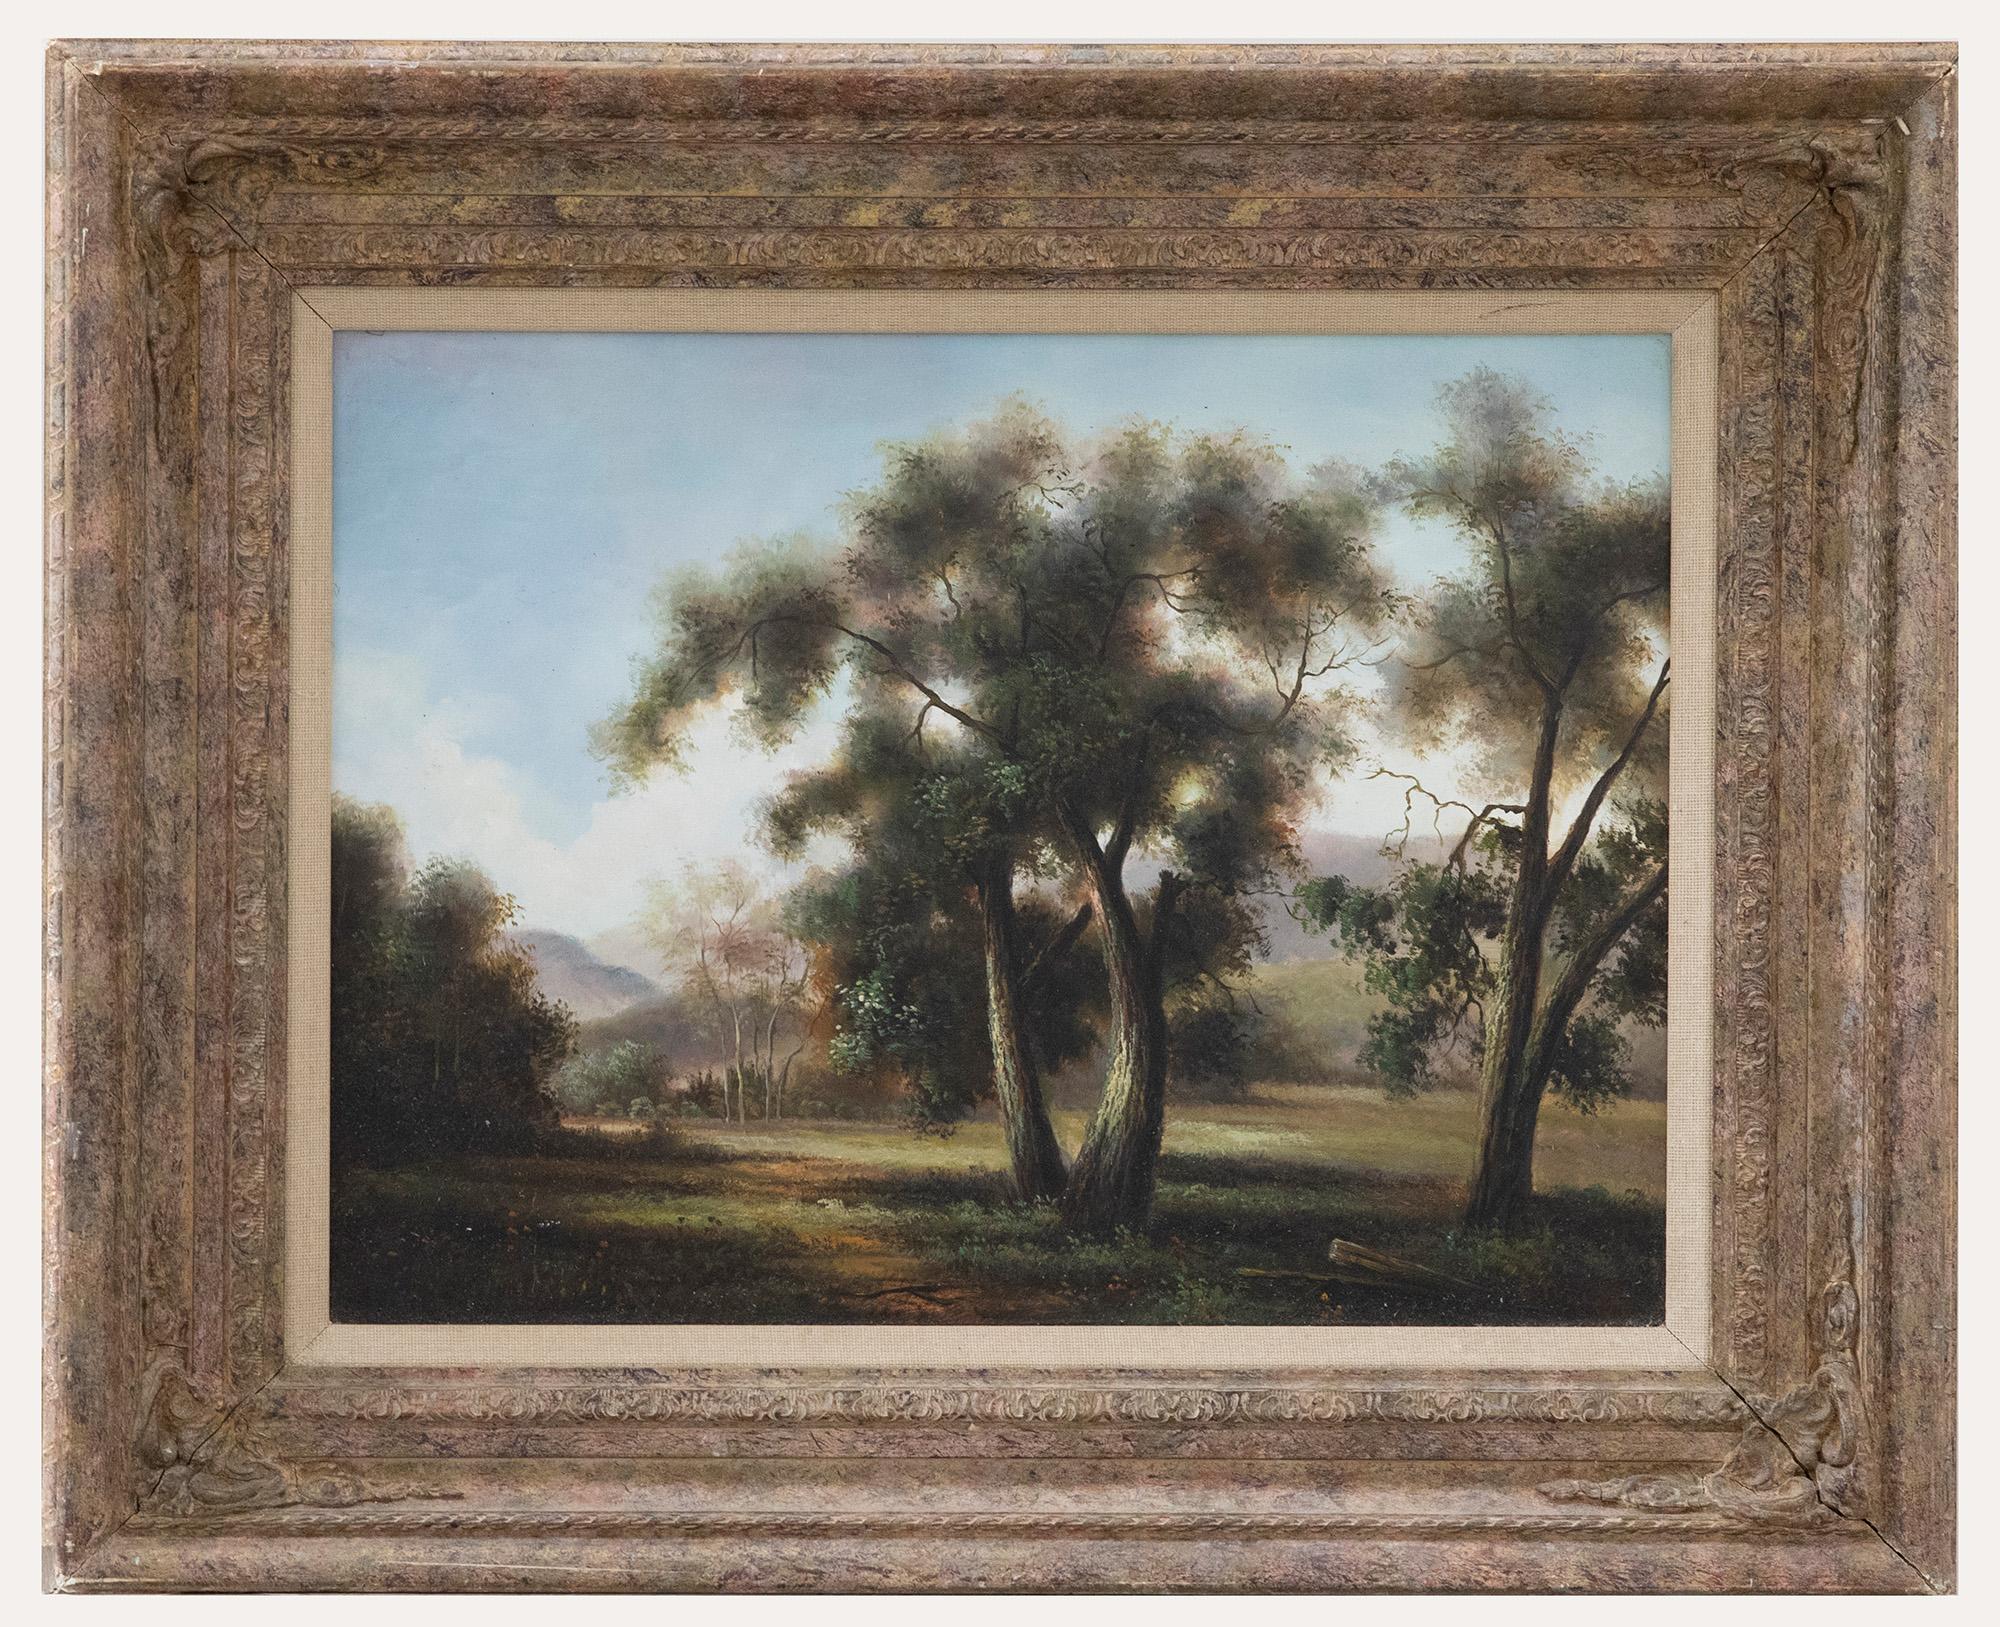 Unknown Landscape Painting - C. Daniel - 20th Century Oil, The Clearing